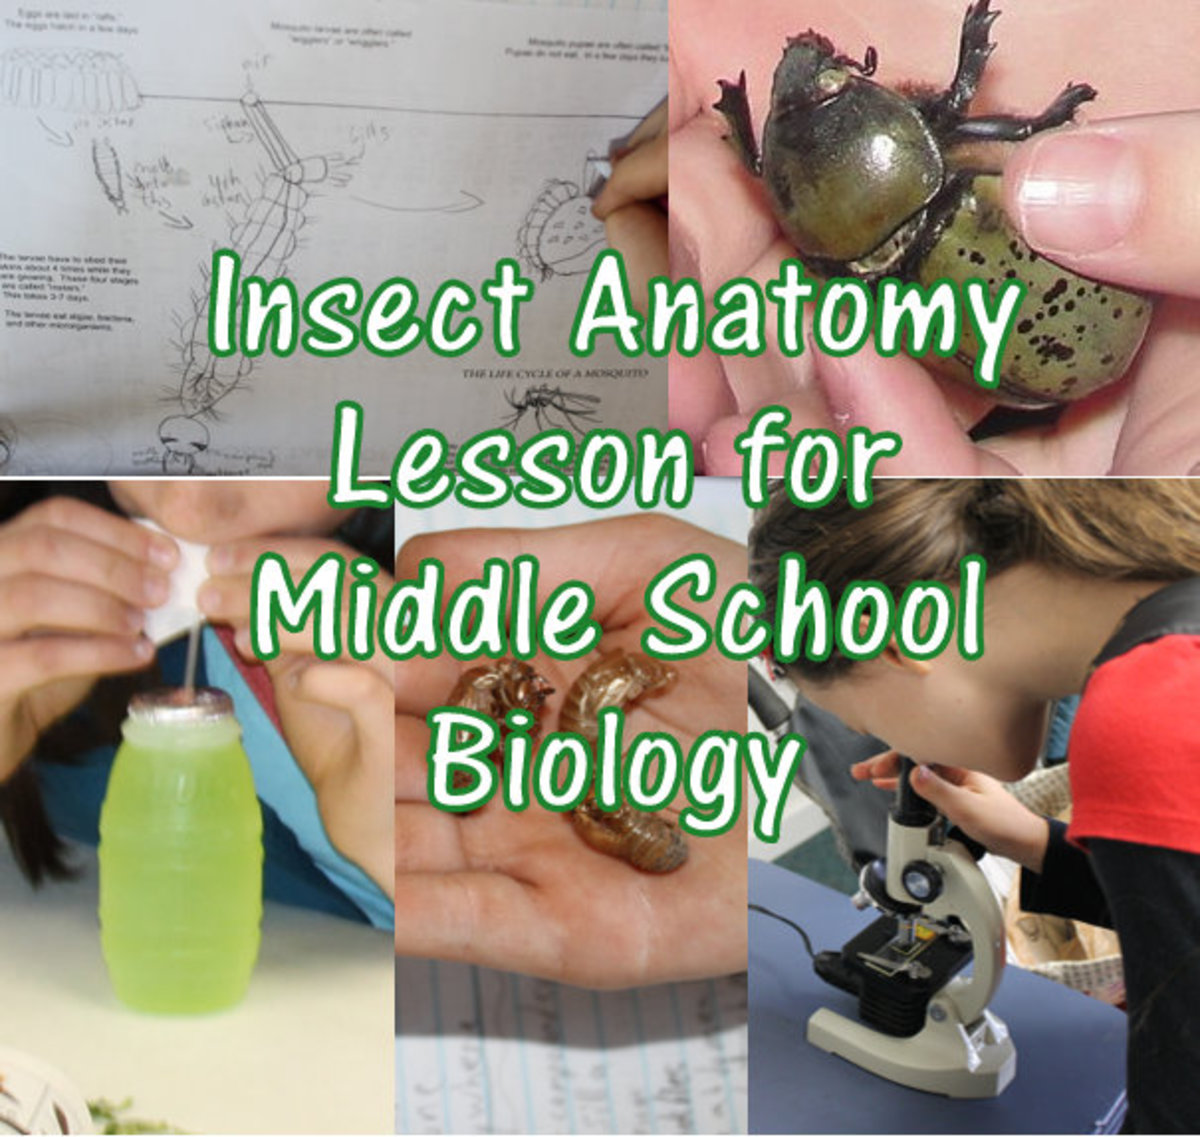 Arthropod Overview and Insect Anatomy Lesson for Middle School Biology